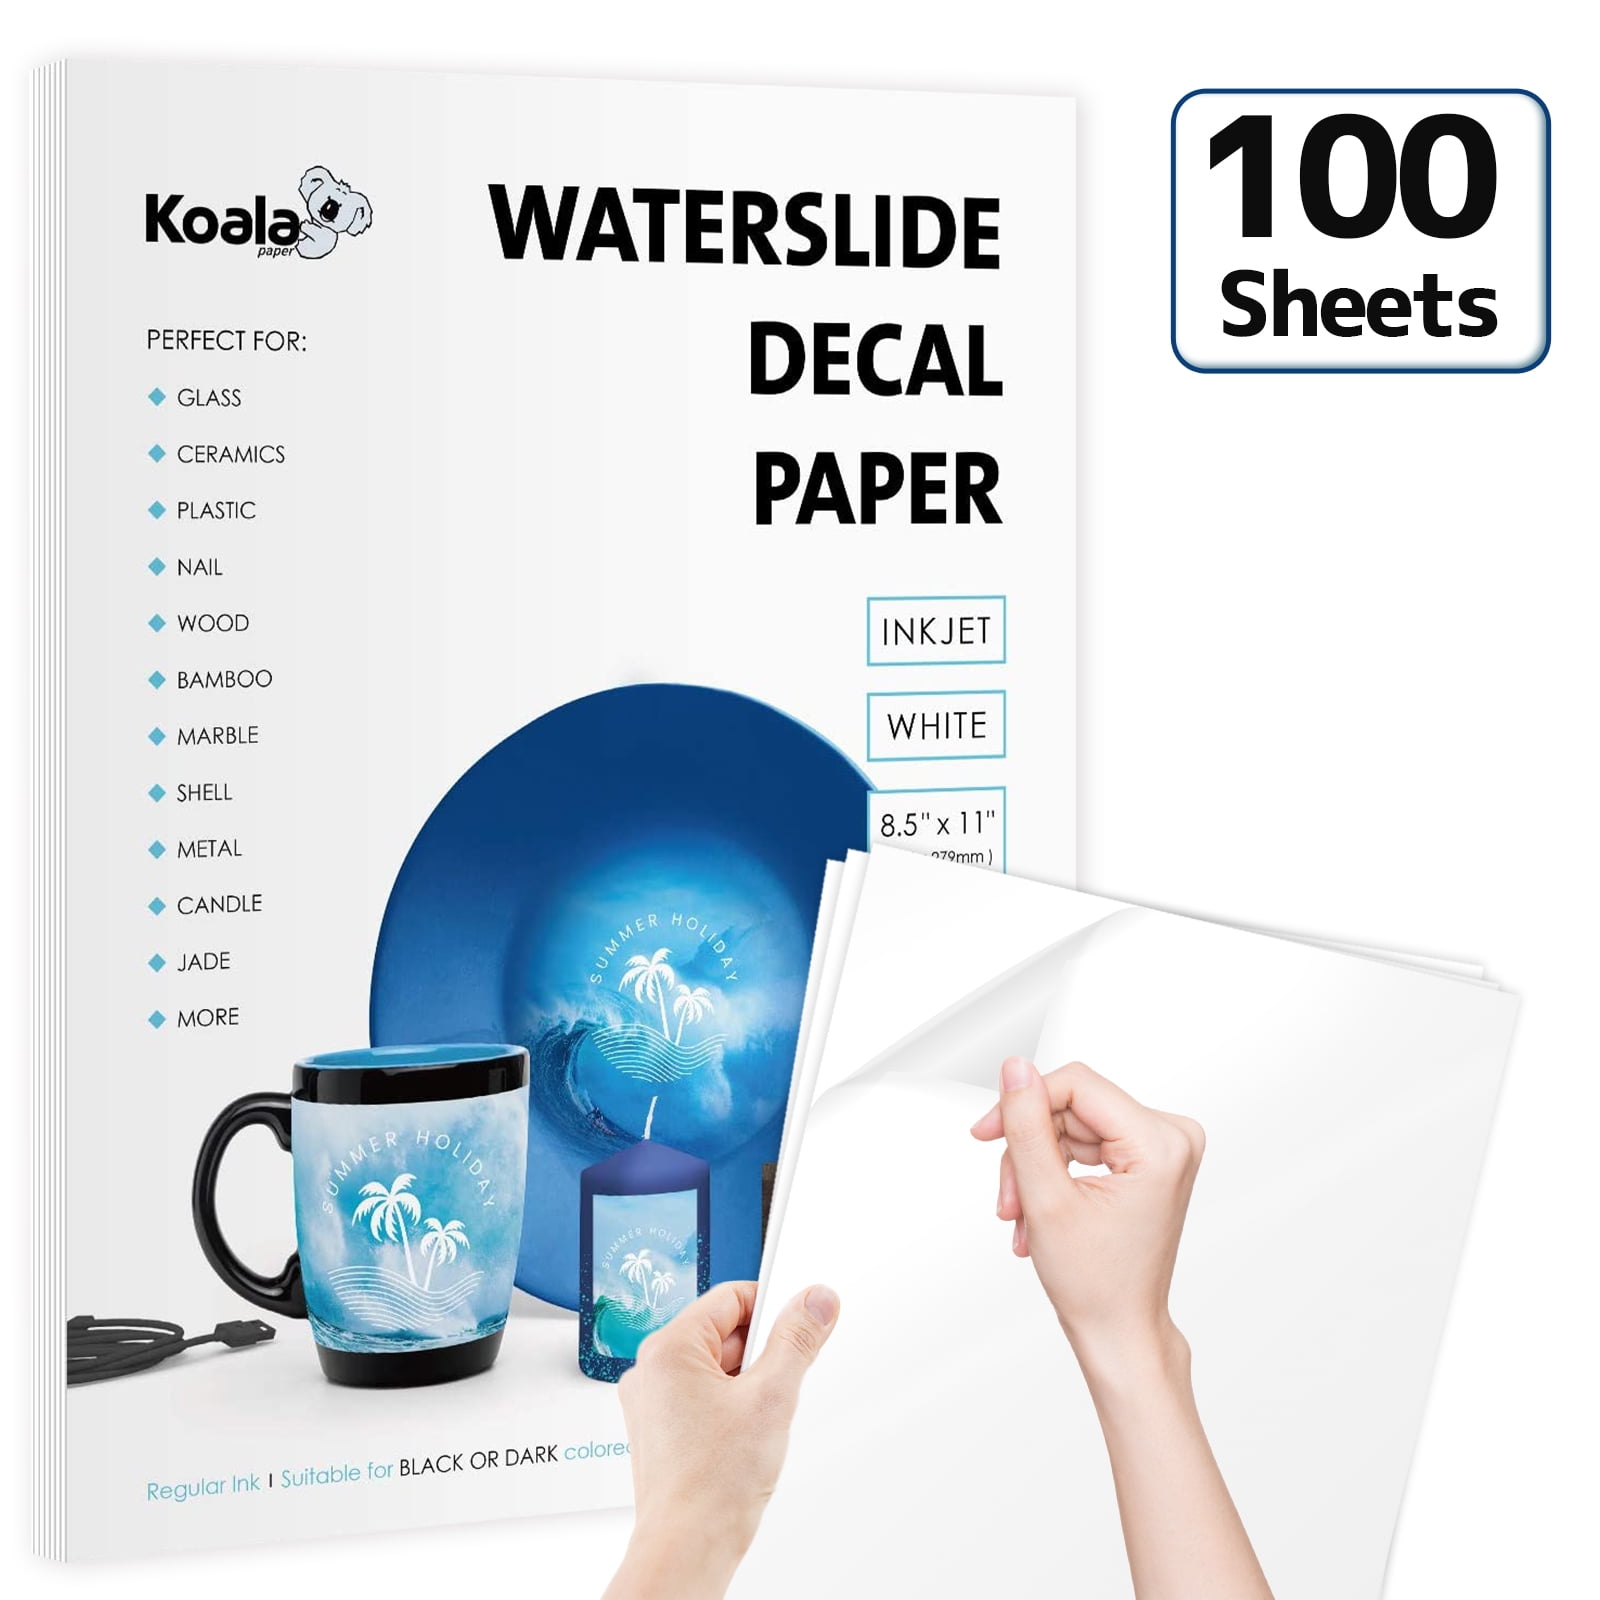  Waterslide Paper-20 sheet Inkjet Water Slide Paper,A4 Size  clear waterslide paper for DIY Decals Gift Crafts Ceramics Candles and  Custom Tumblers, waterslide decal paper (The packaging may be blue) : Office